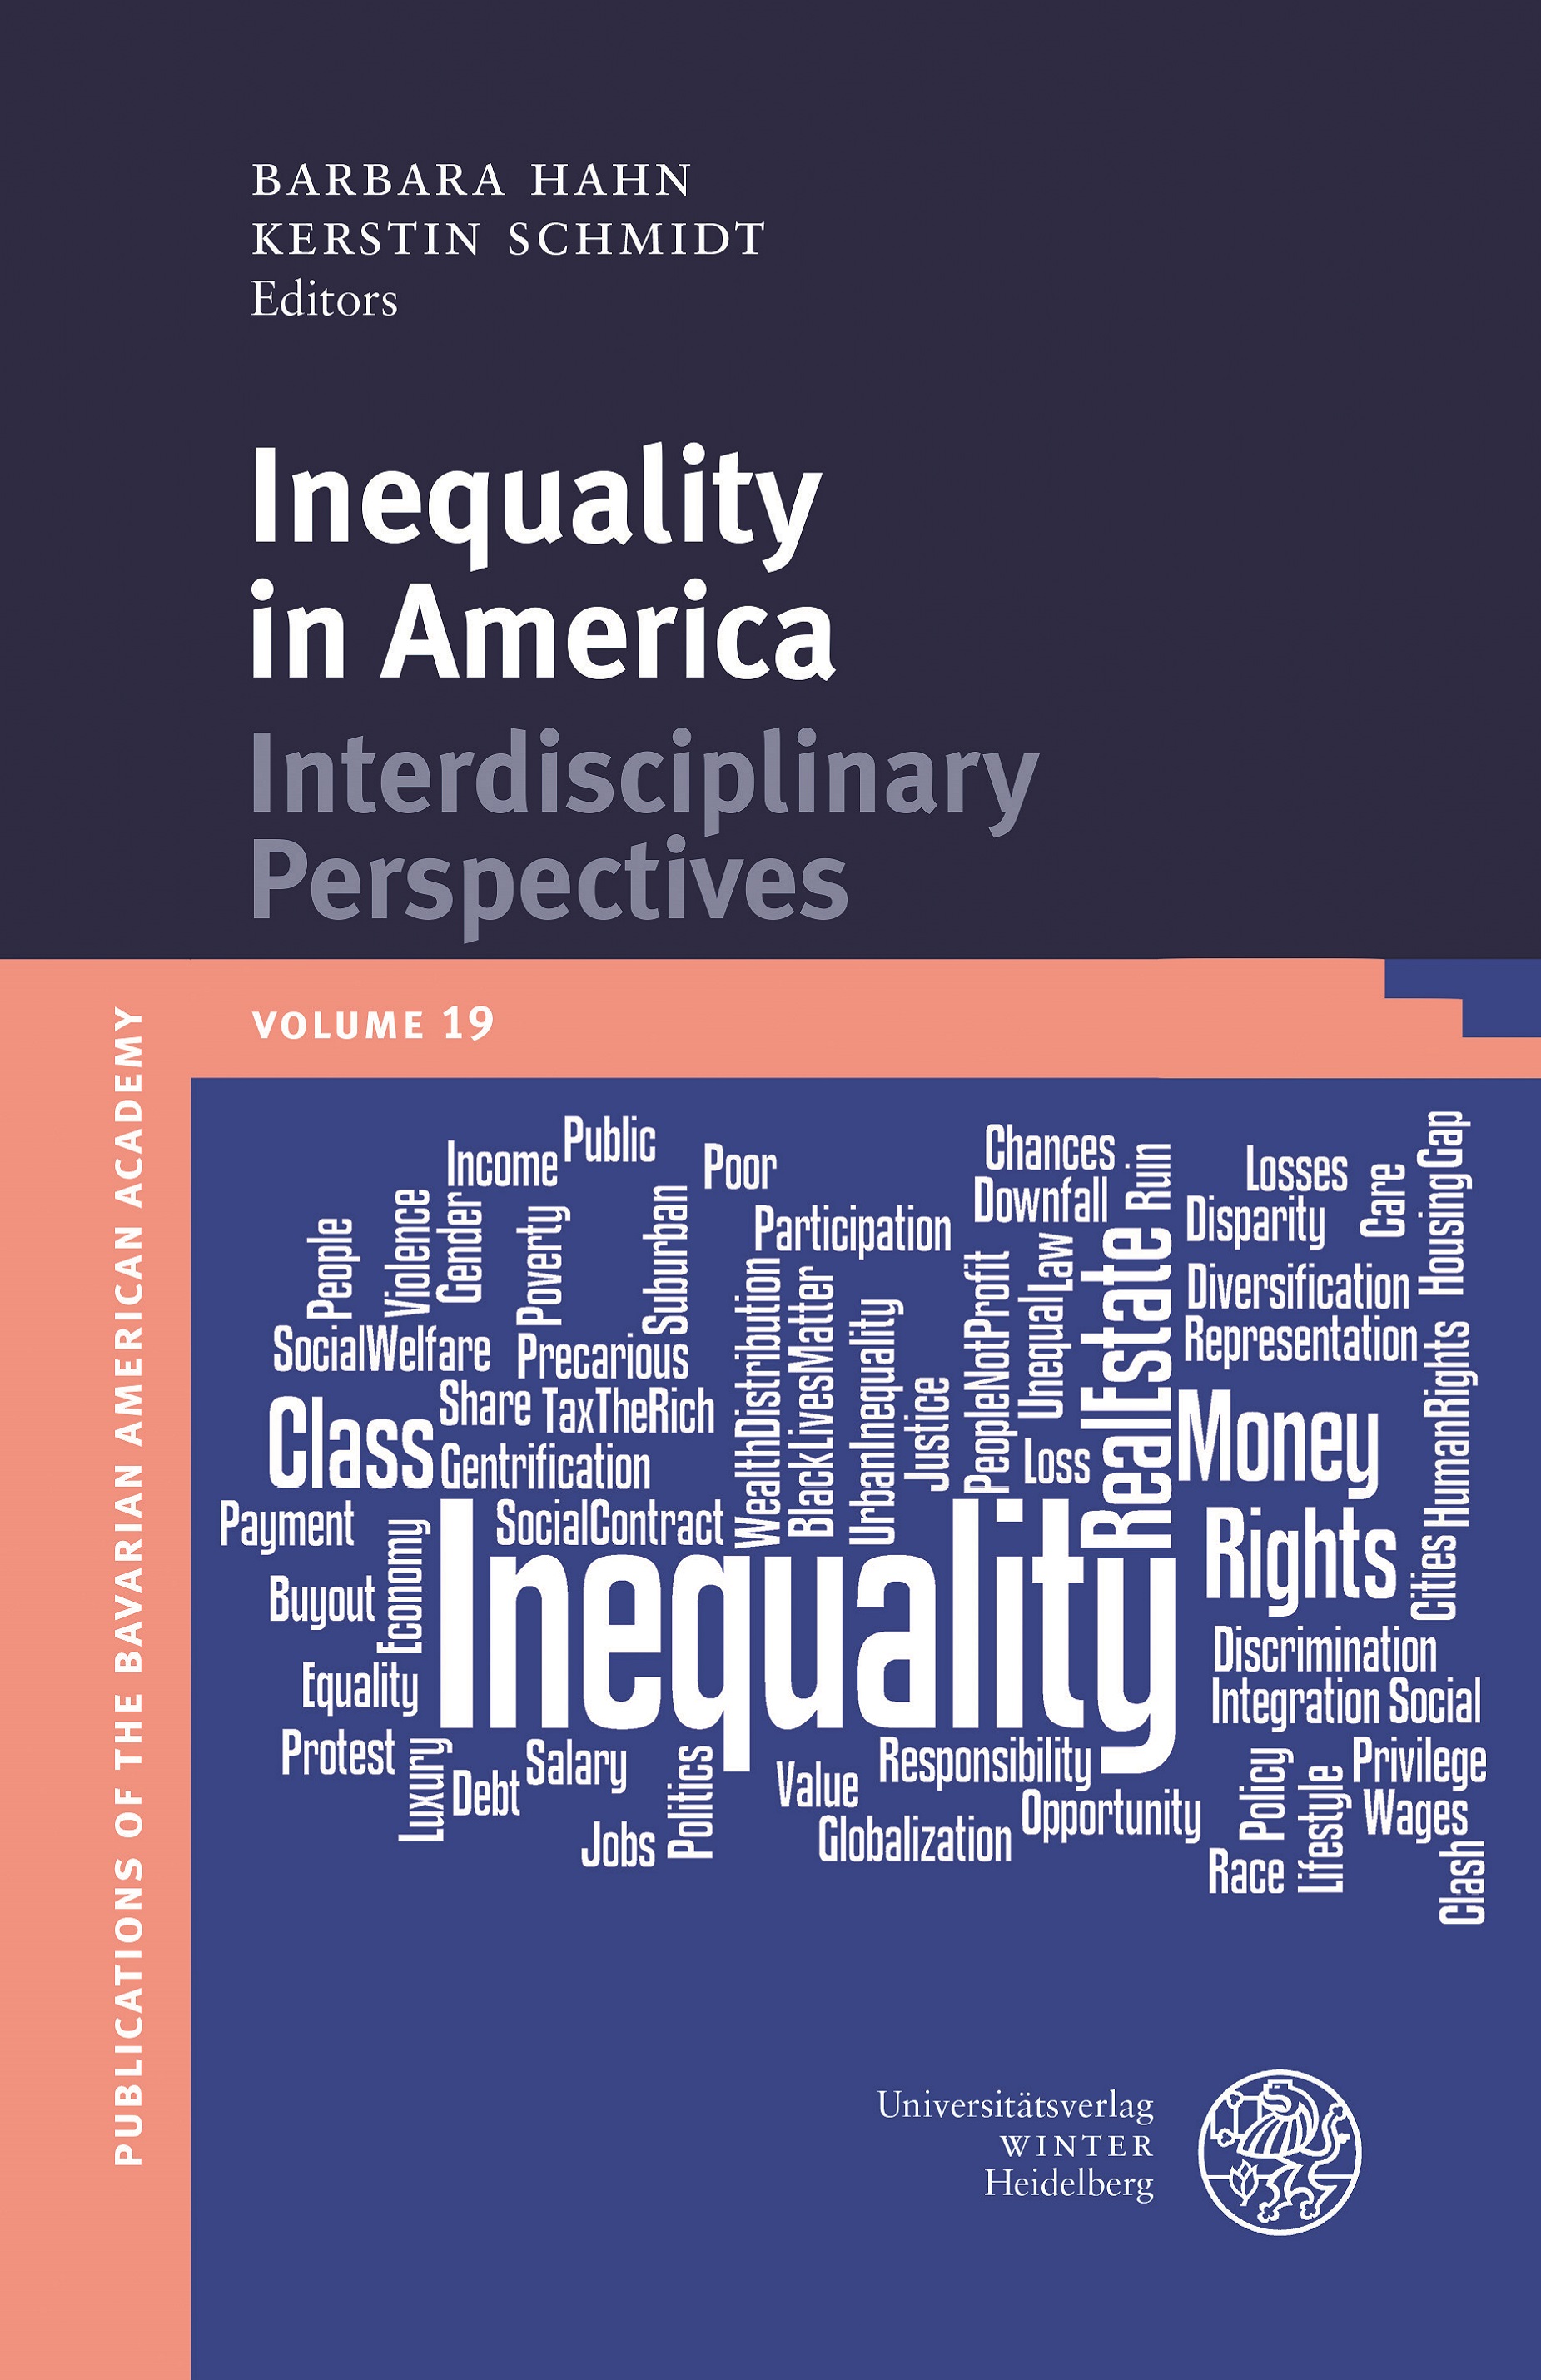 BAA publication Vol. 19 Inequality in America: Interdisciplinary Perspectives